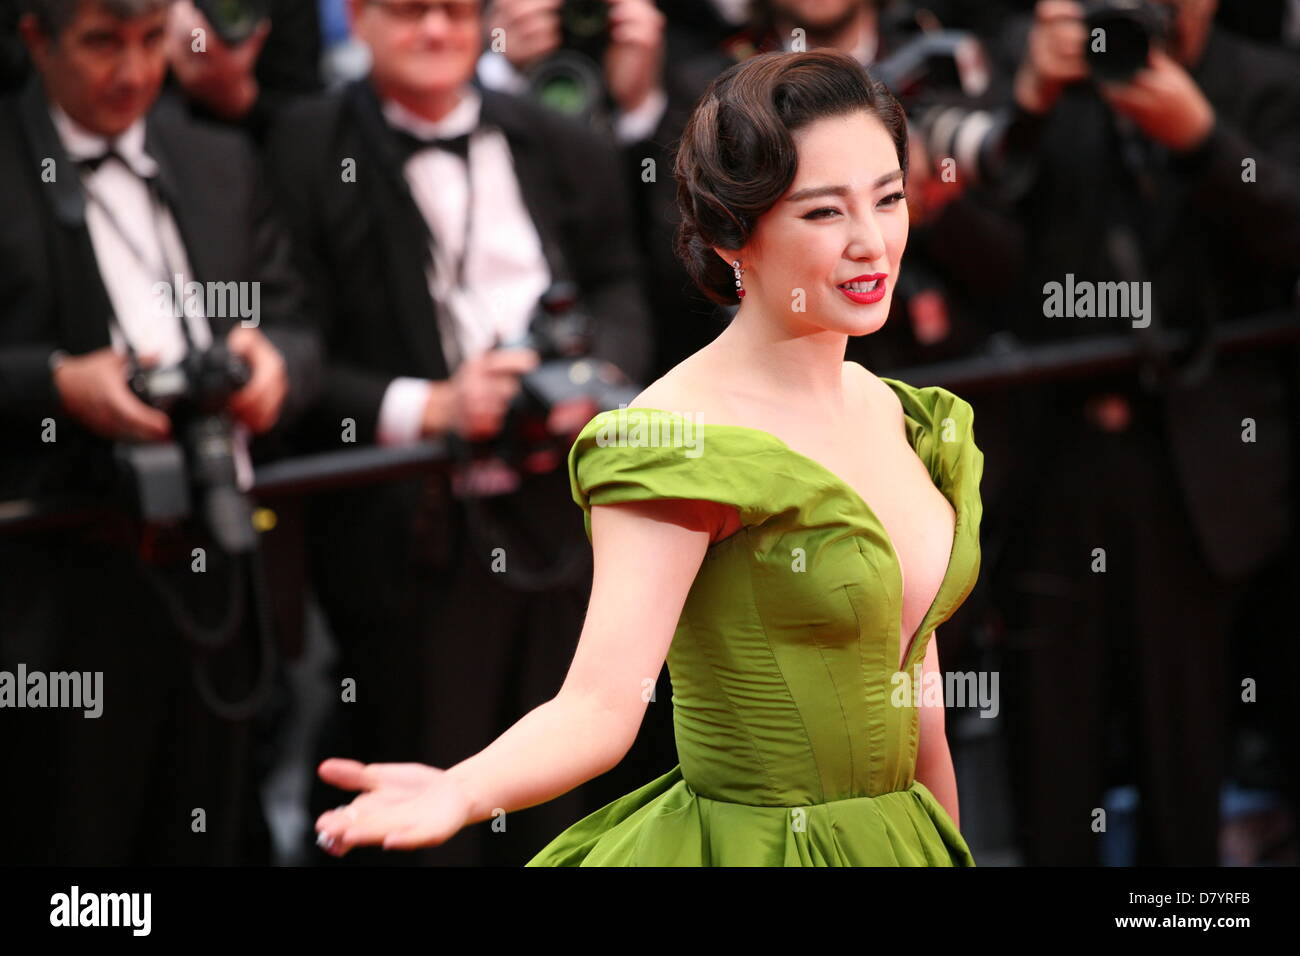 Cannes,  May 2013. Zhang Yuqi attending the gala screening of  The Great Gatsby at the Cannes Film Festival on 15th May 2013, Cannes,  : Doreen Kennedy/Alamy Live News Stock Photo -